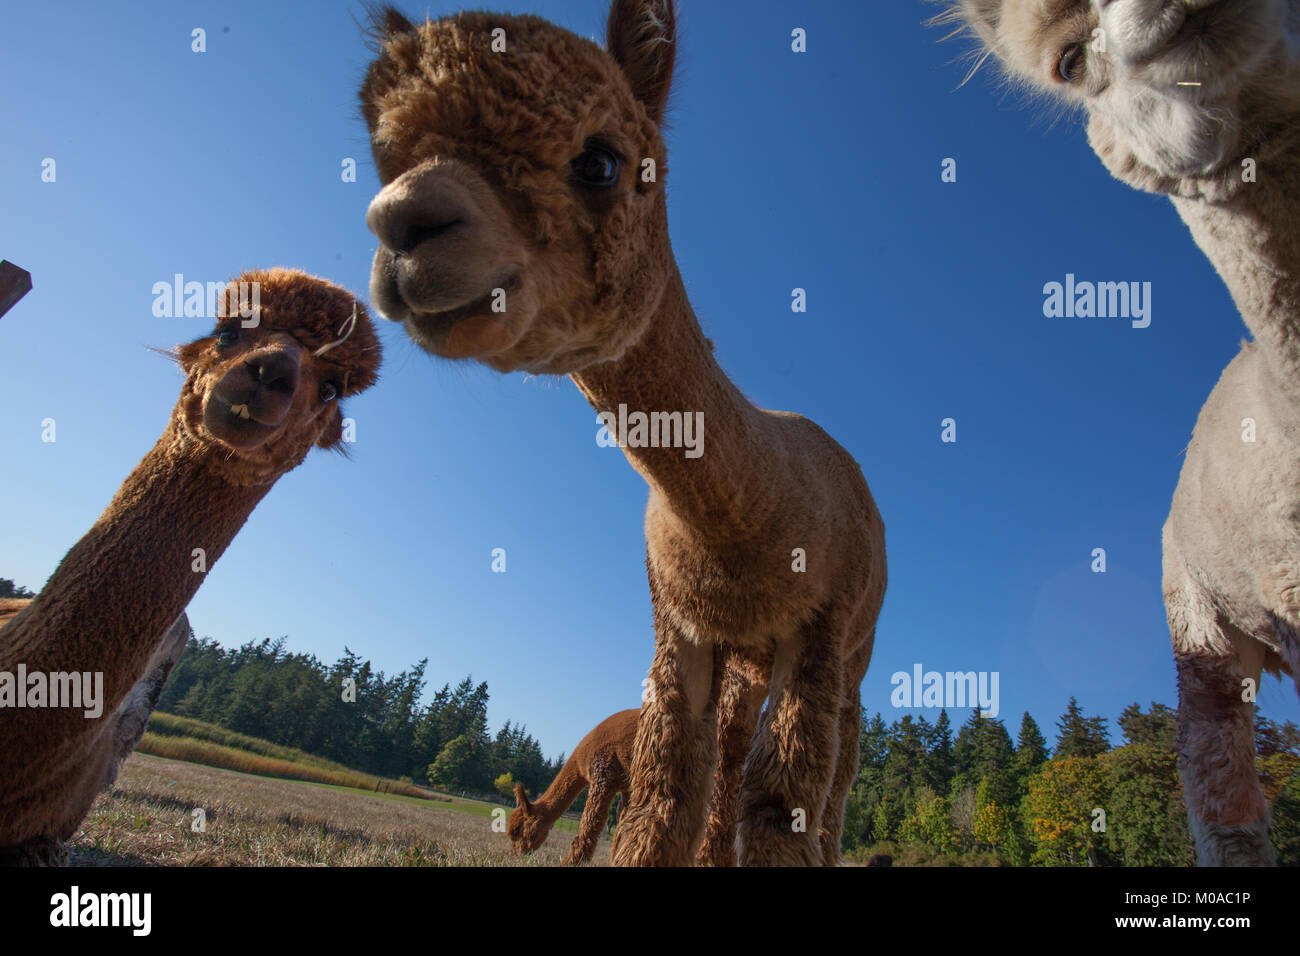 Looking up at cute Alpacas Stock Photo